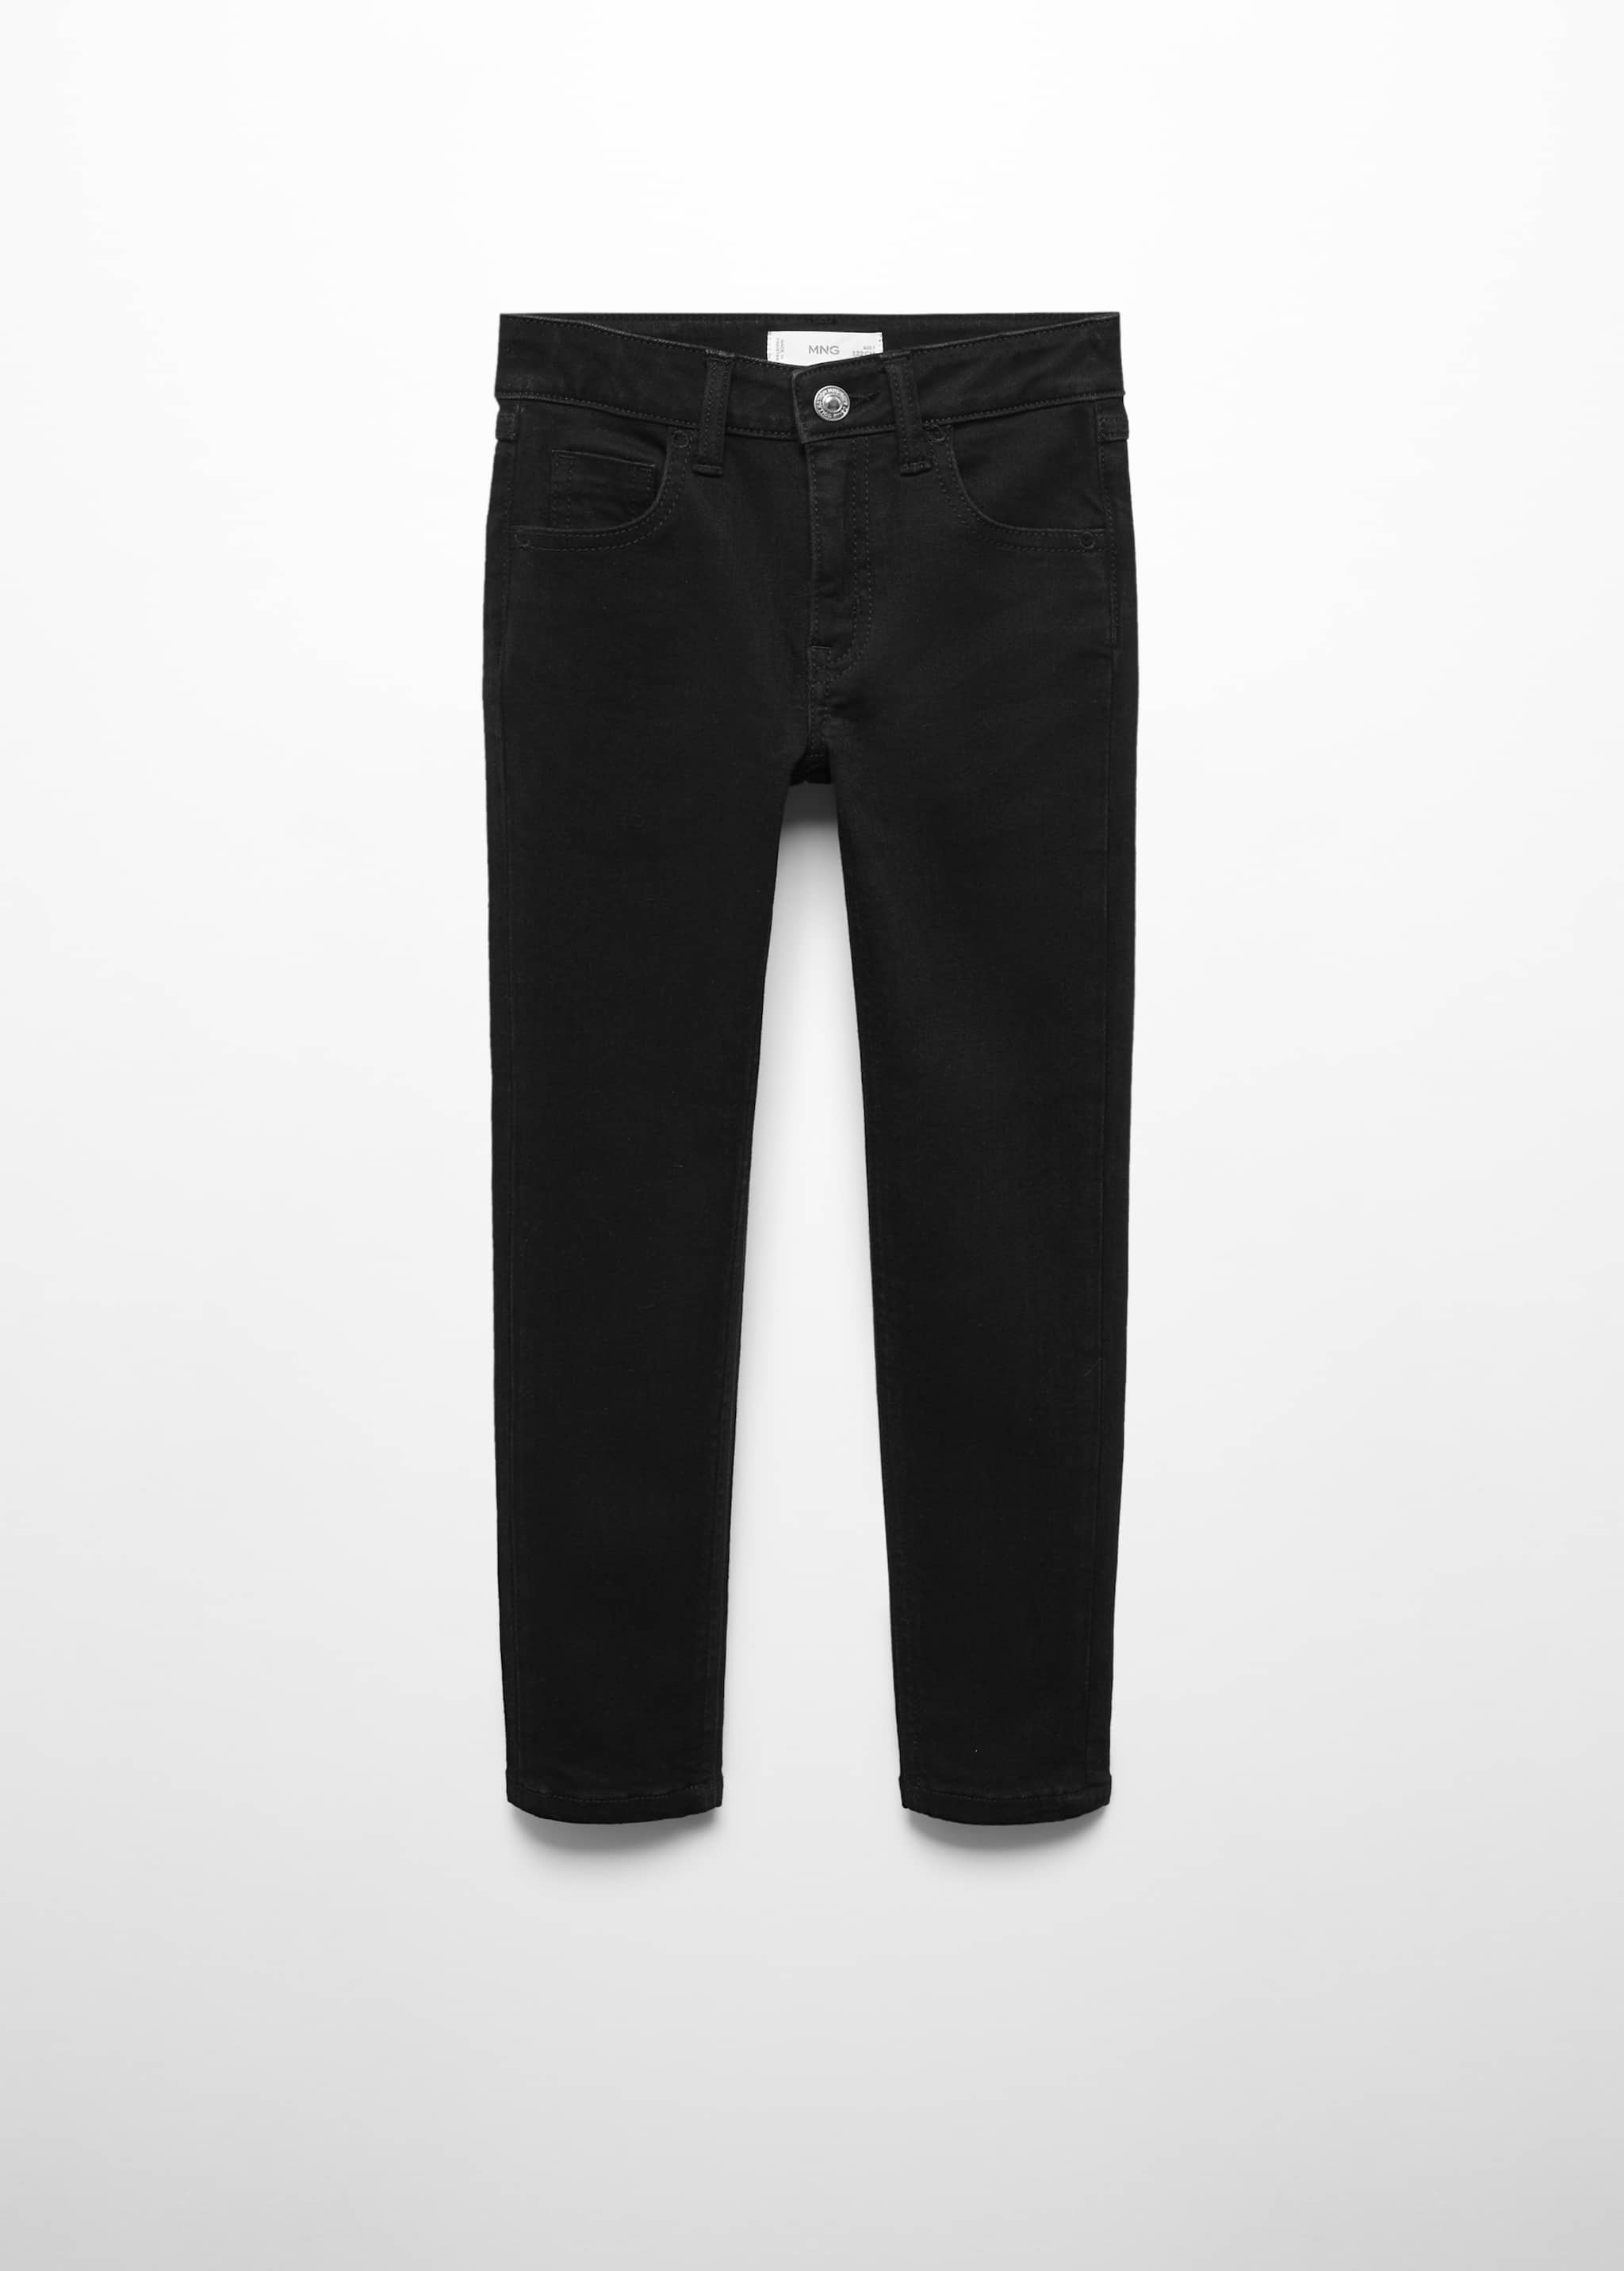 Cotton skinny Jeans - Article without model